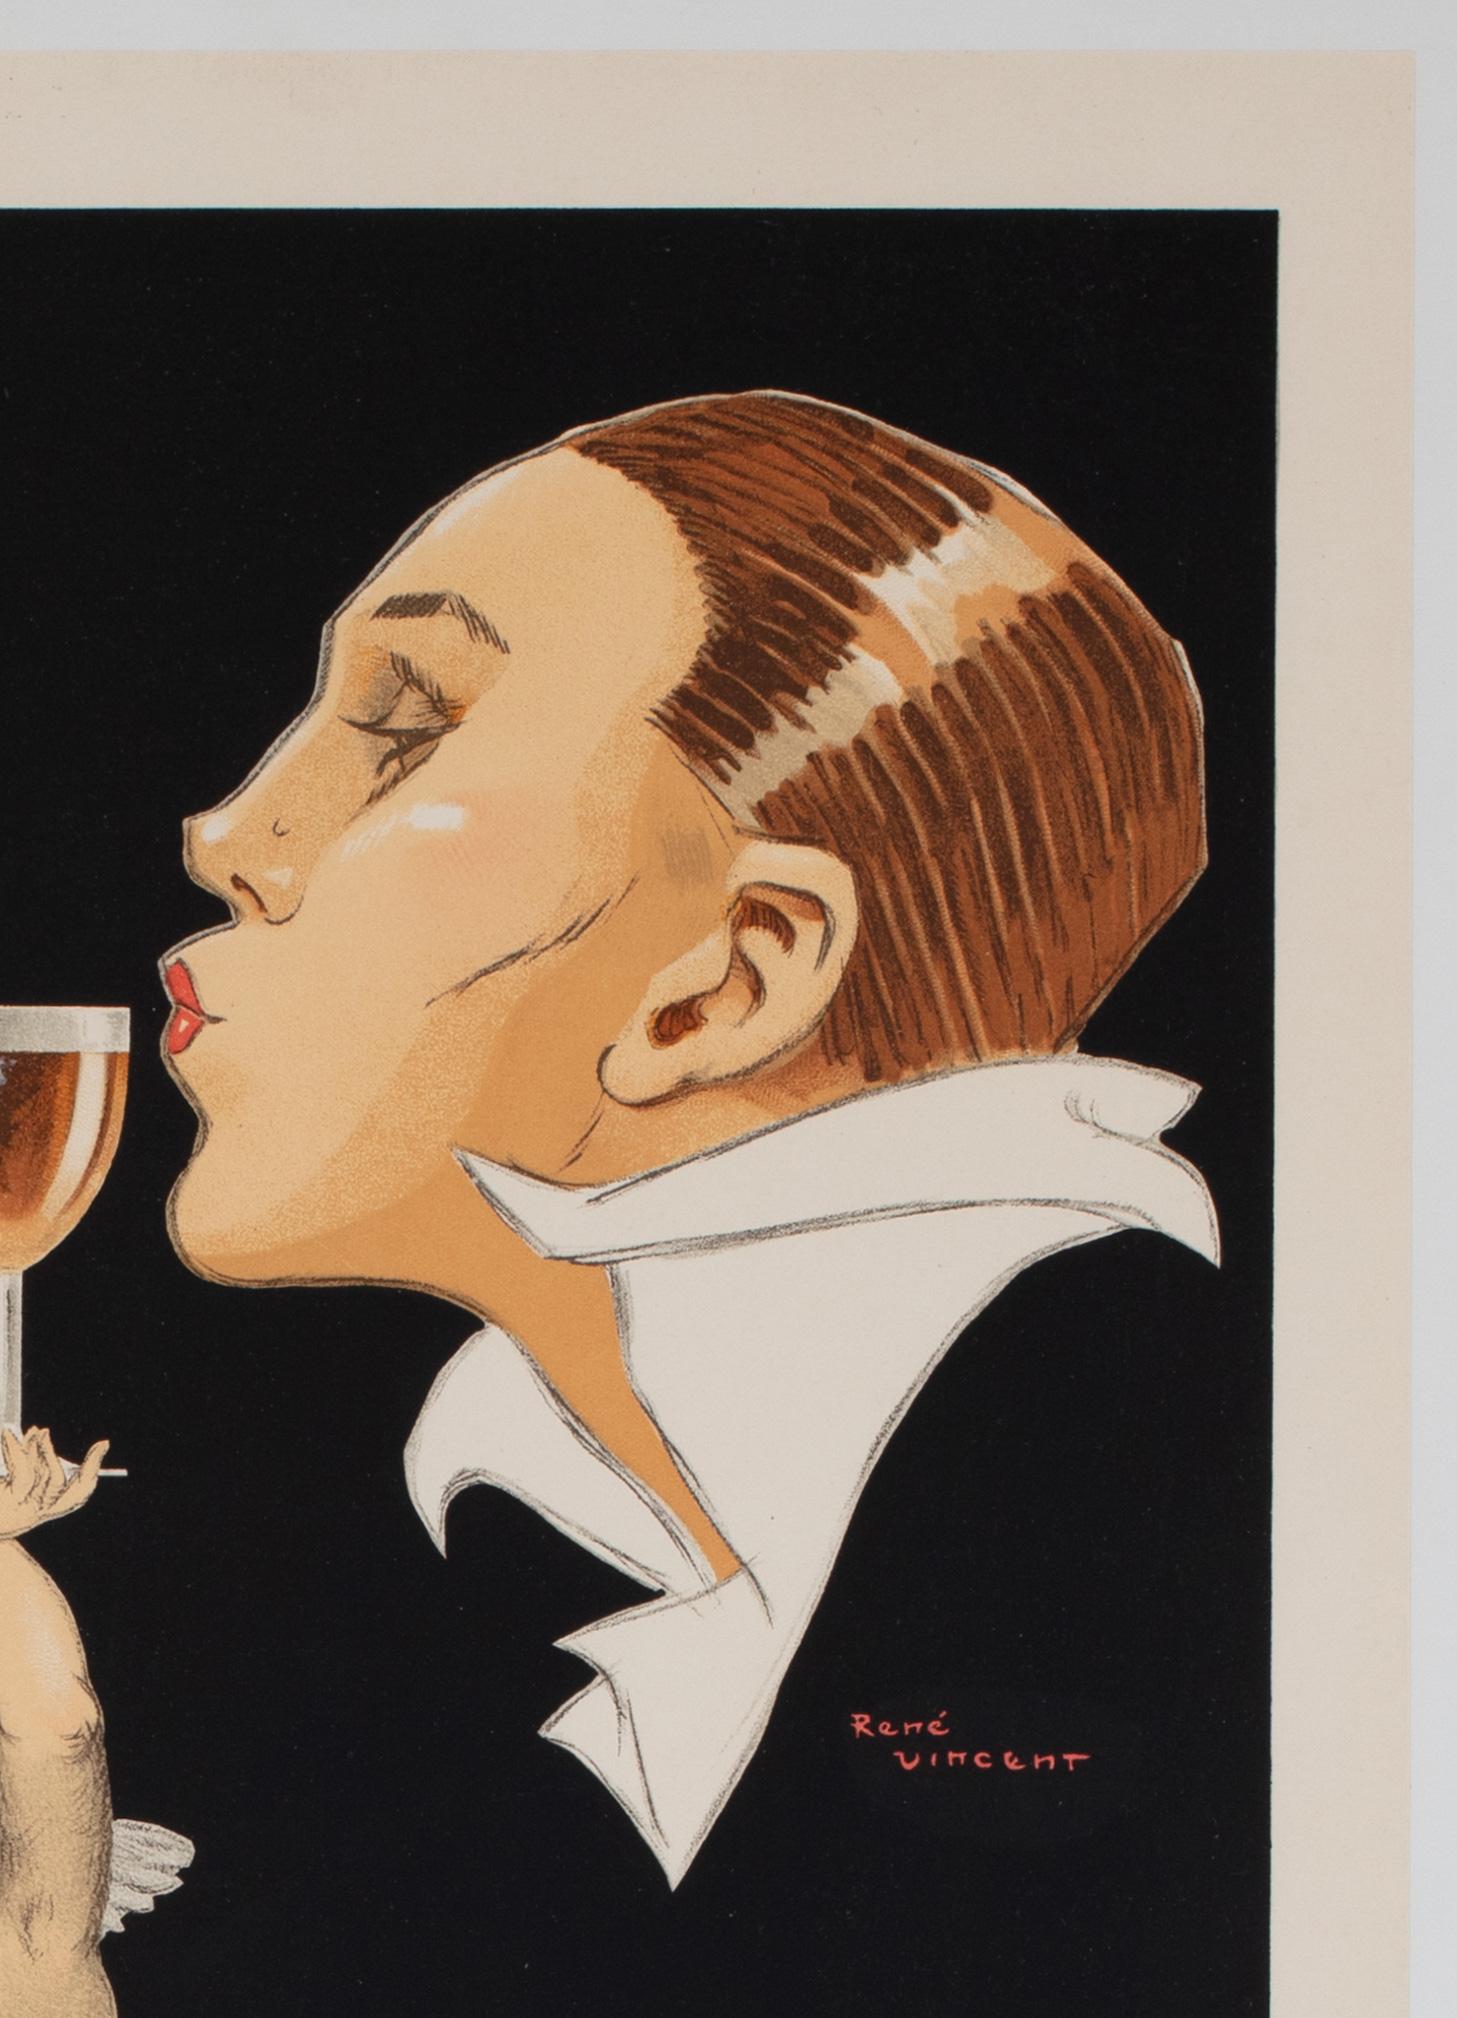 20th Century Porto Ramos c1920 French Alcohol Advertising Poster, Rene Vincent For Sale